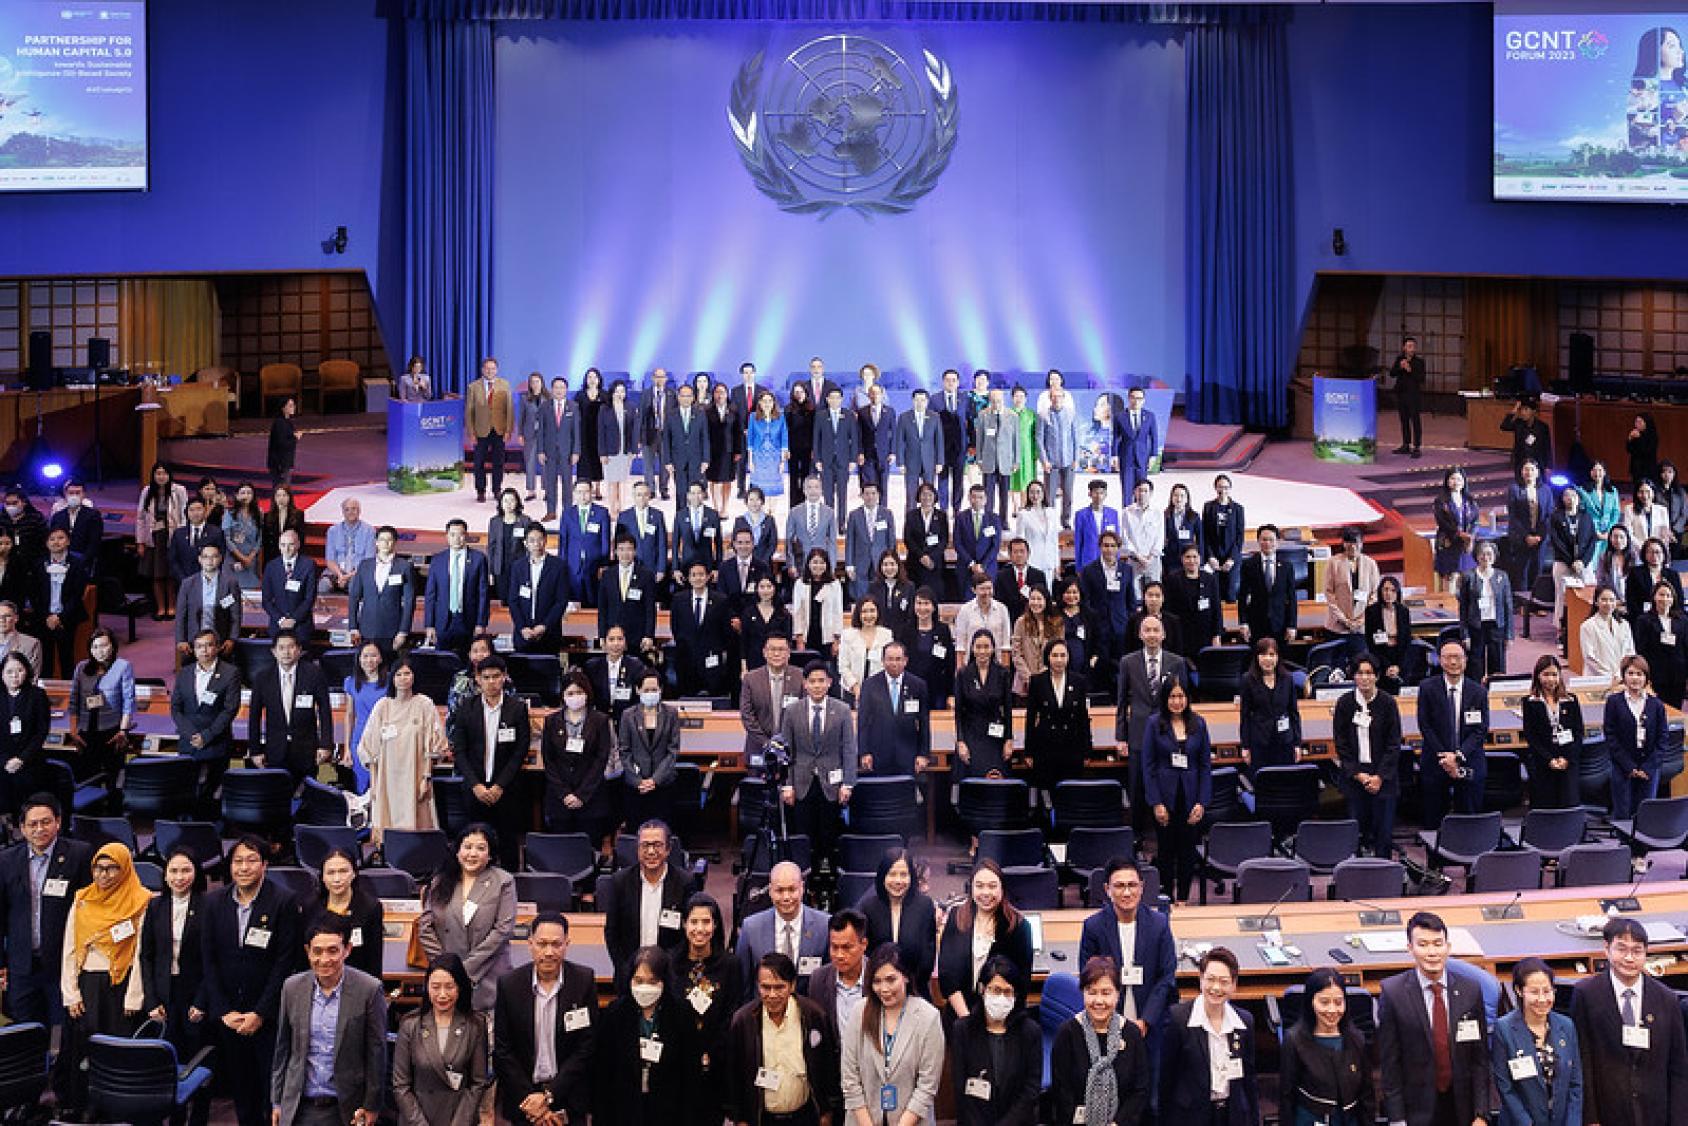 A large group of people, mostly wearing suits and formal attire are in an auditorium with the UN logo in the background